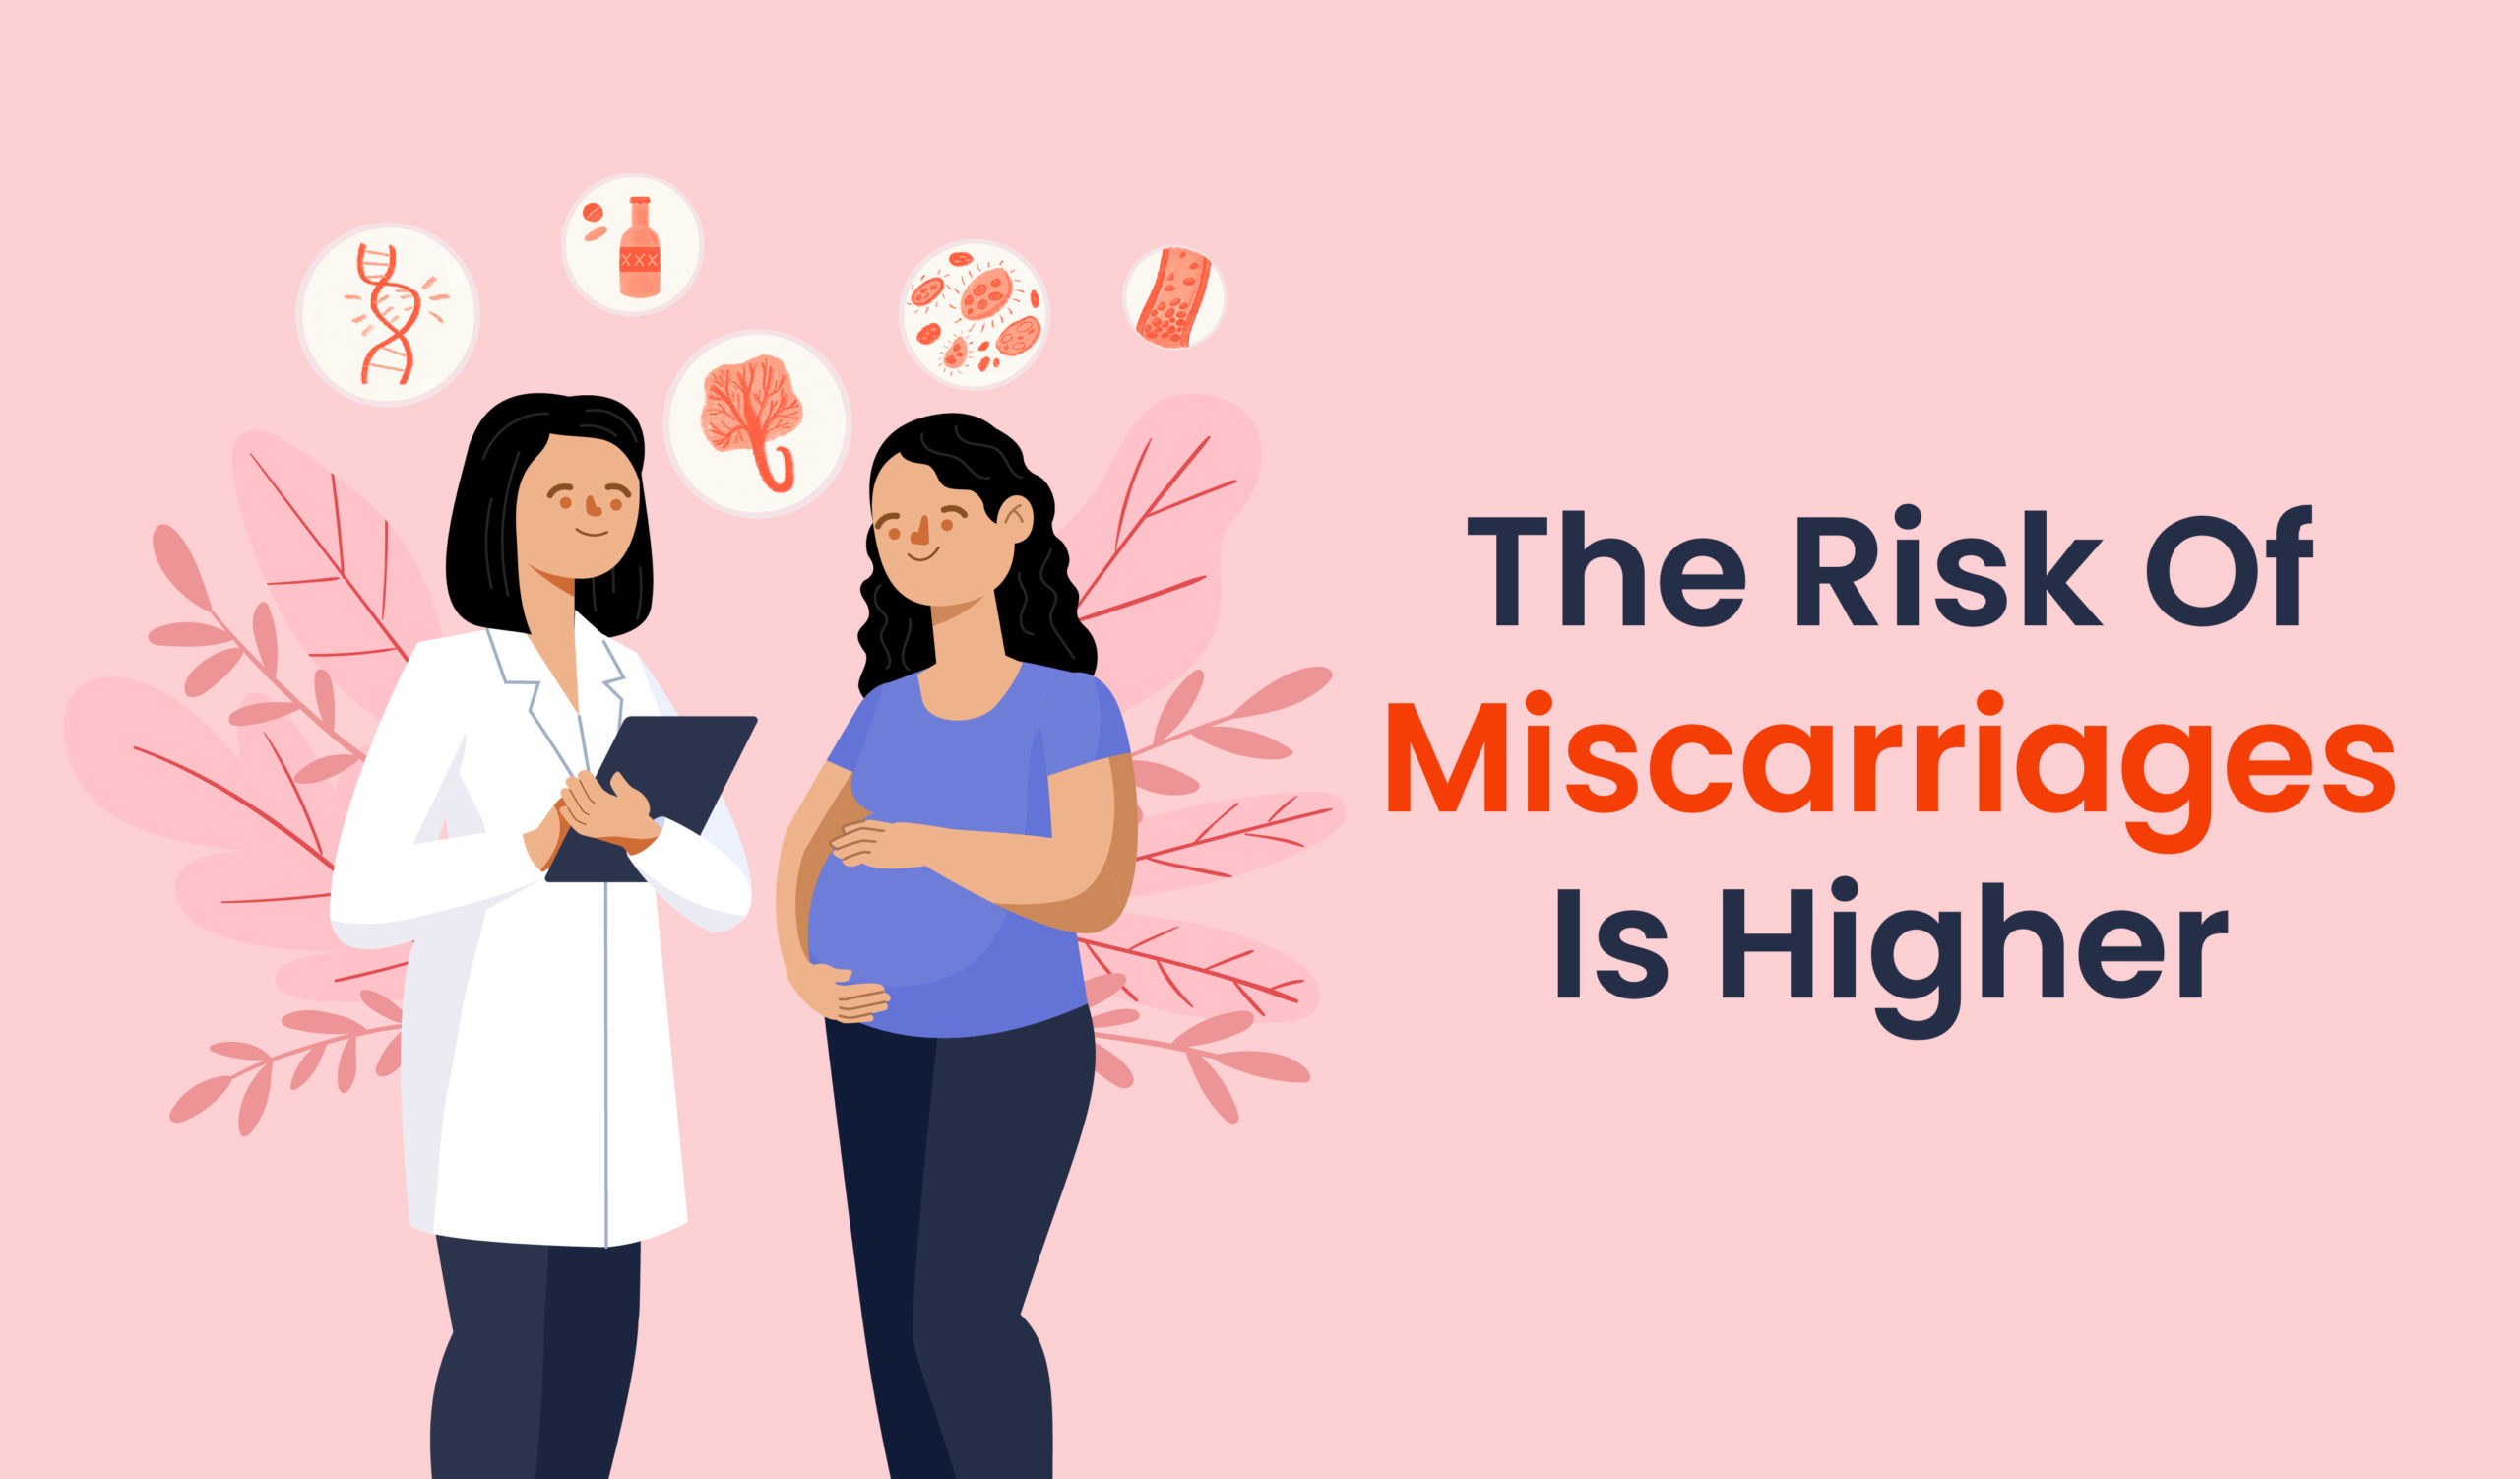 The risk of miscarriages is higher